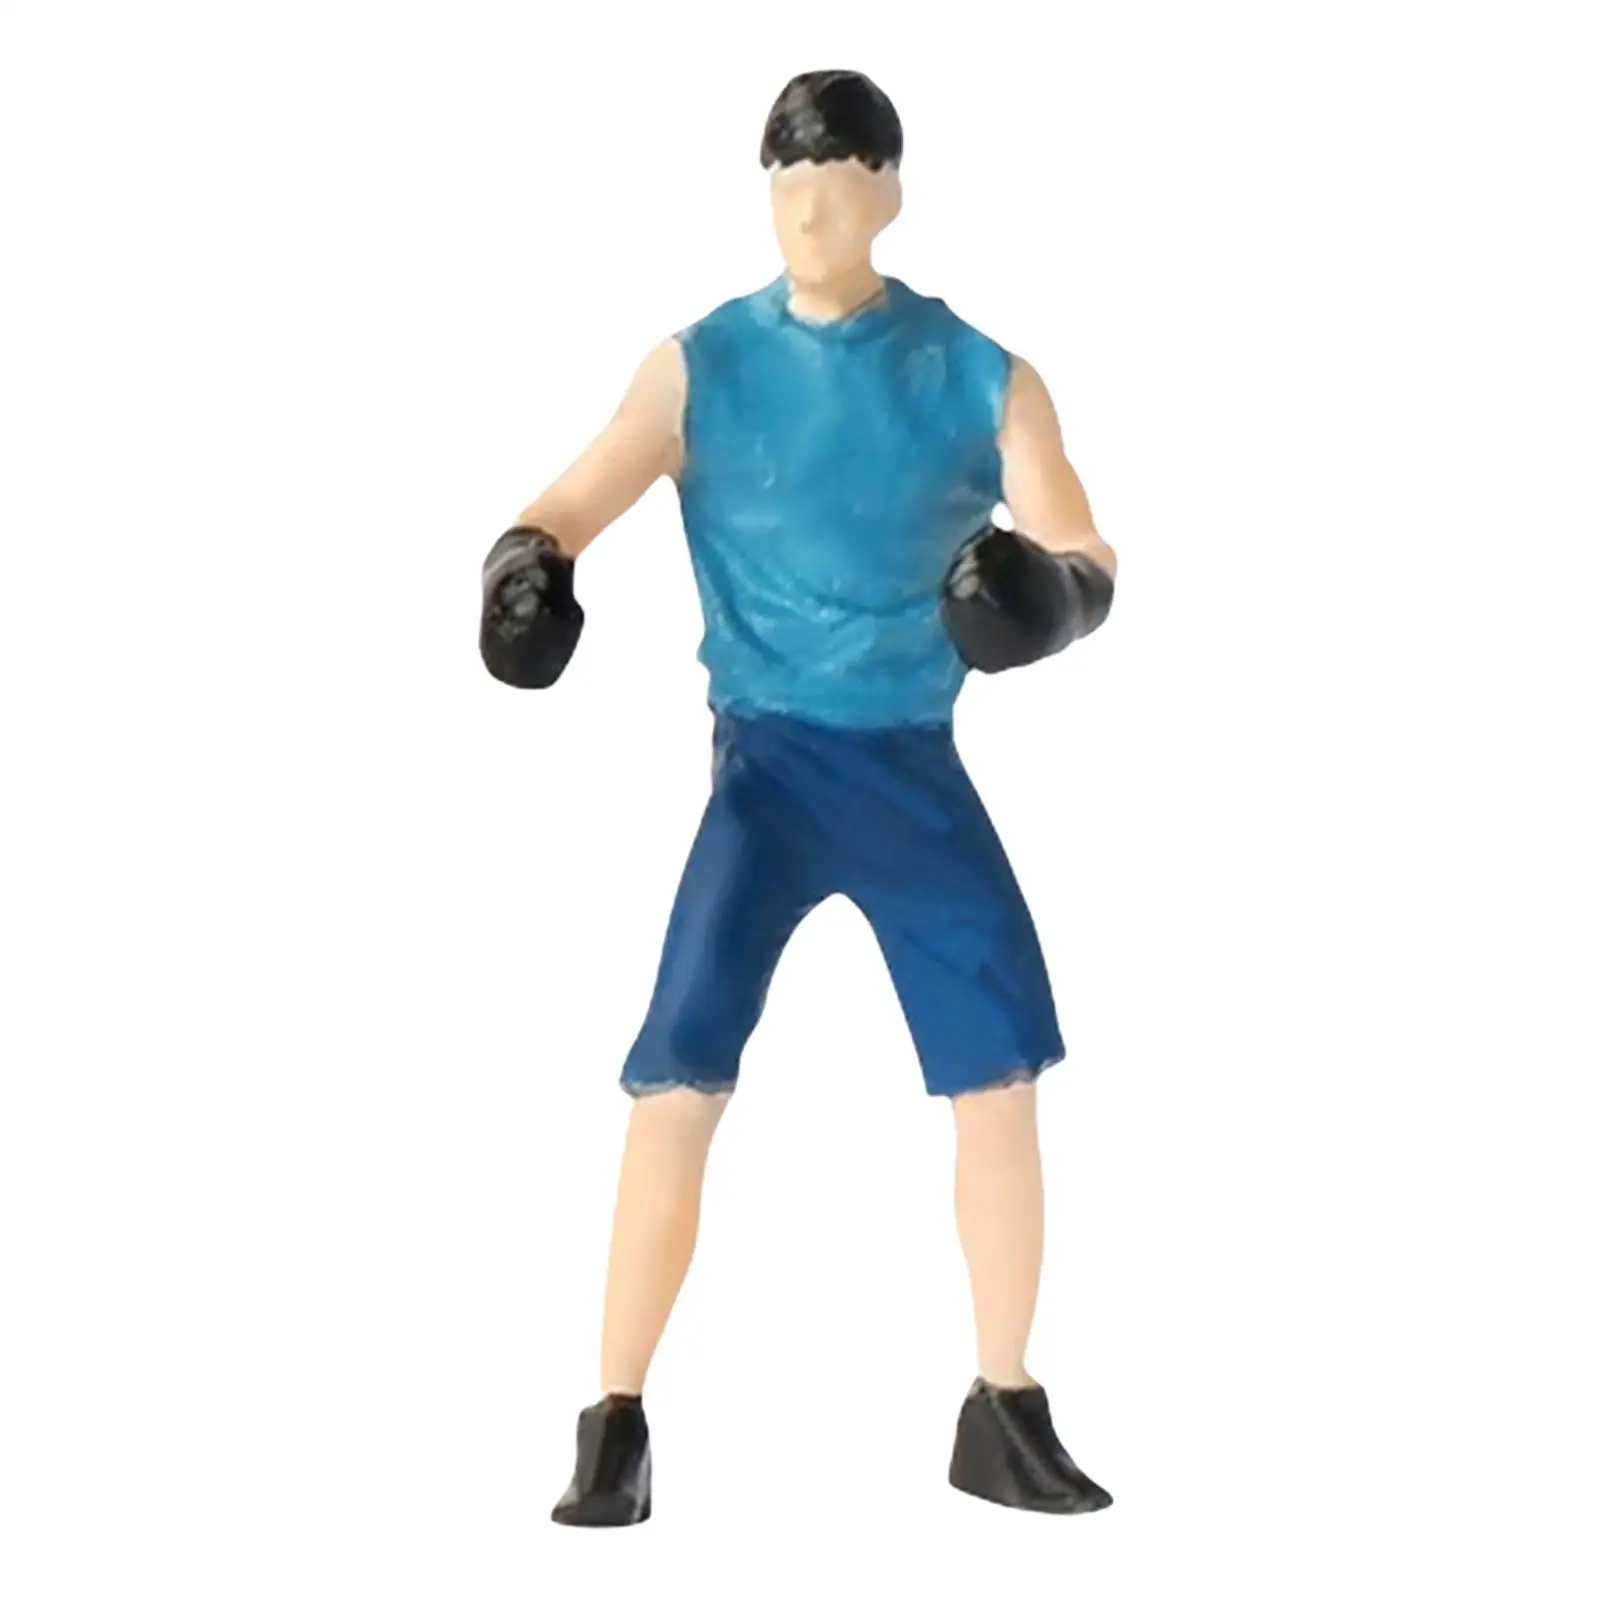 Mini 1:64 Figures Boxing Figurines for Miniature Scene Photography Props